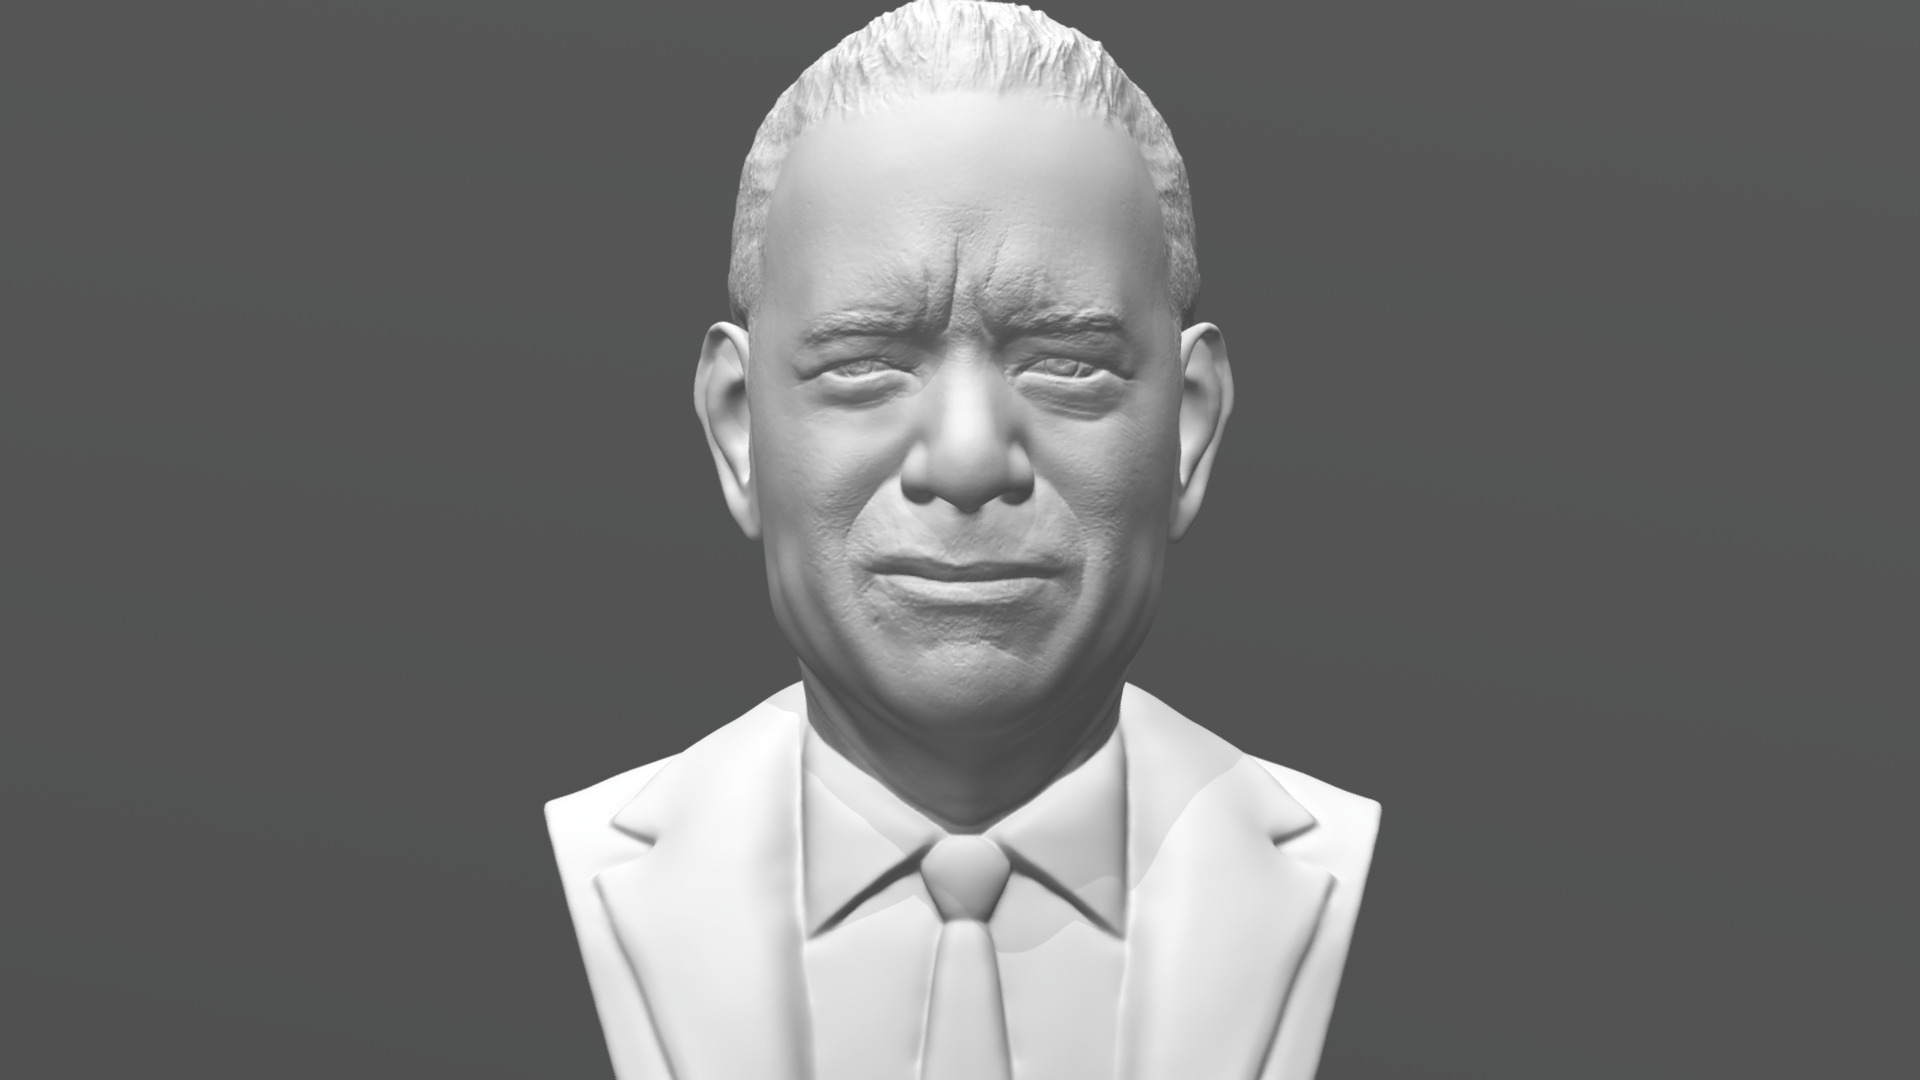 3D model Tom Hanks bust for 3D printing - This is a 3D model of the Tom Hanks bust for 3D printing. The 3D model is about a man in a suit.